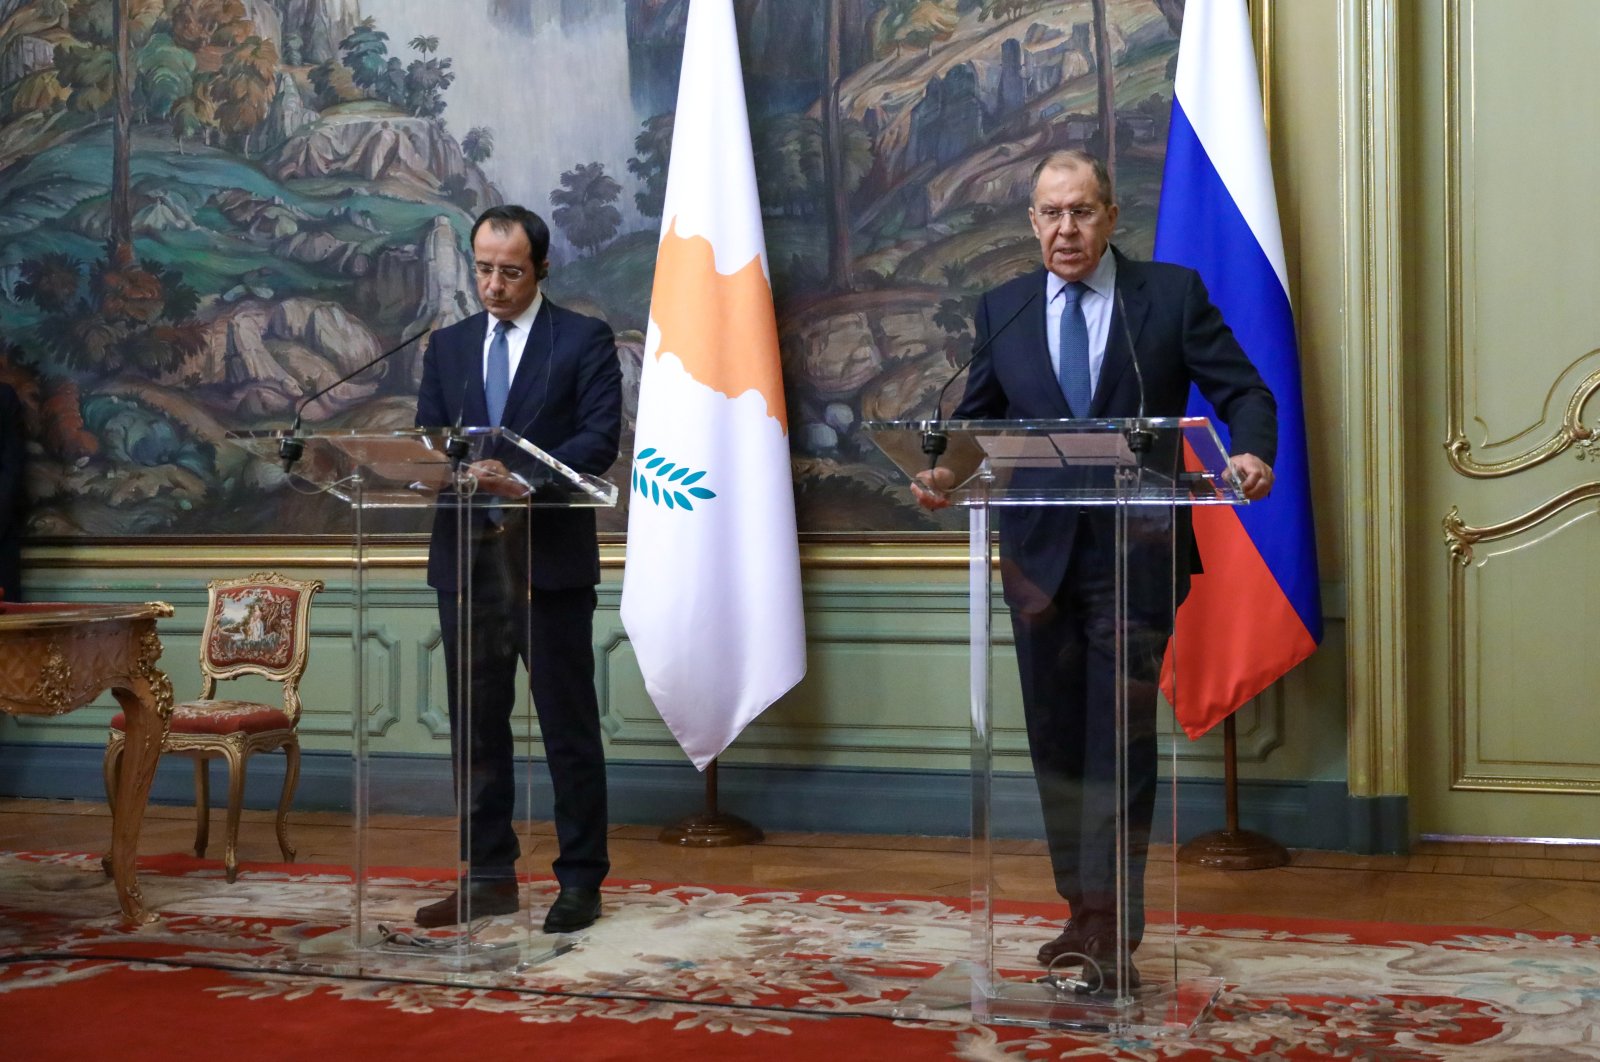 Russian Foreign Minister Sergei Lavrov and Greek Cypriot Foreign Minister Nikos Christodoulides attend a news conference following their meeting in Moscow, Russia, Oct. 21, 2021. (REUTERS Photo)